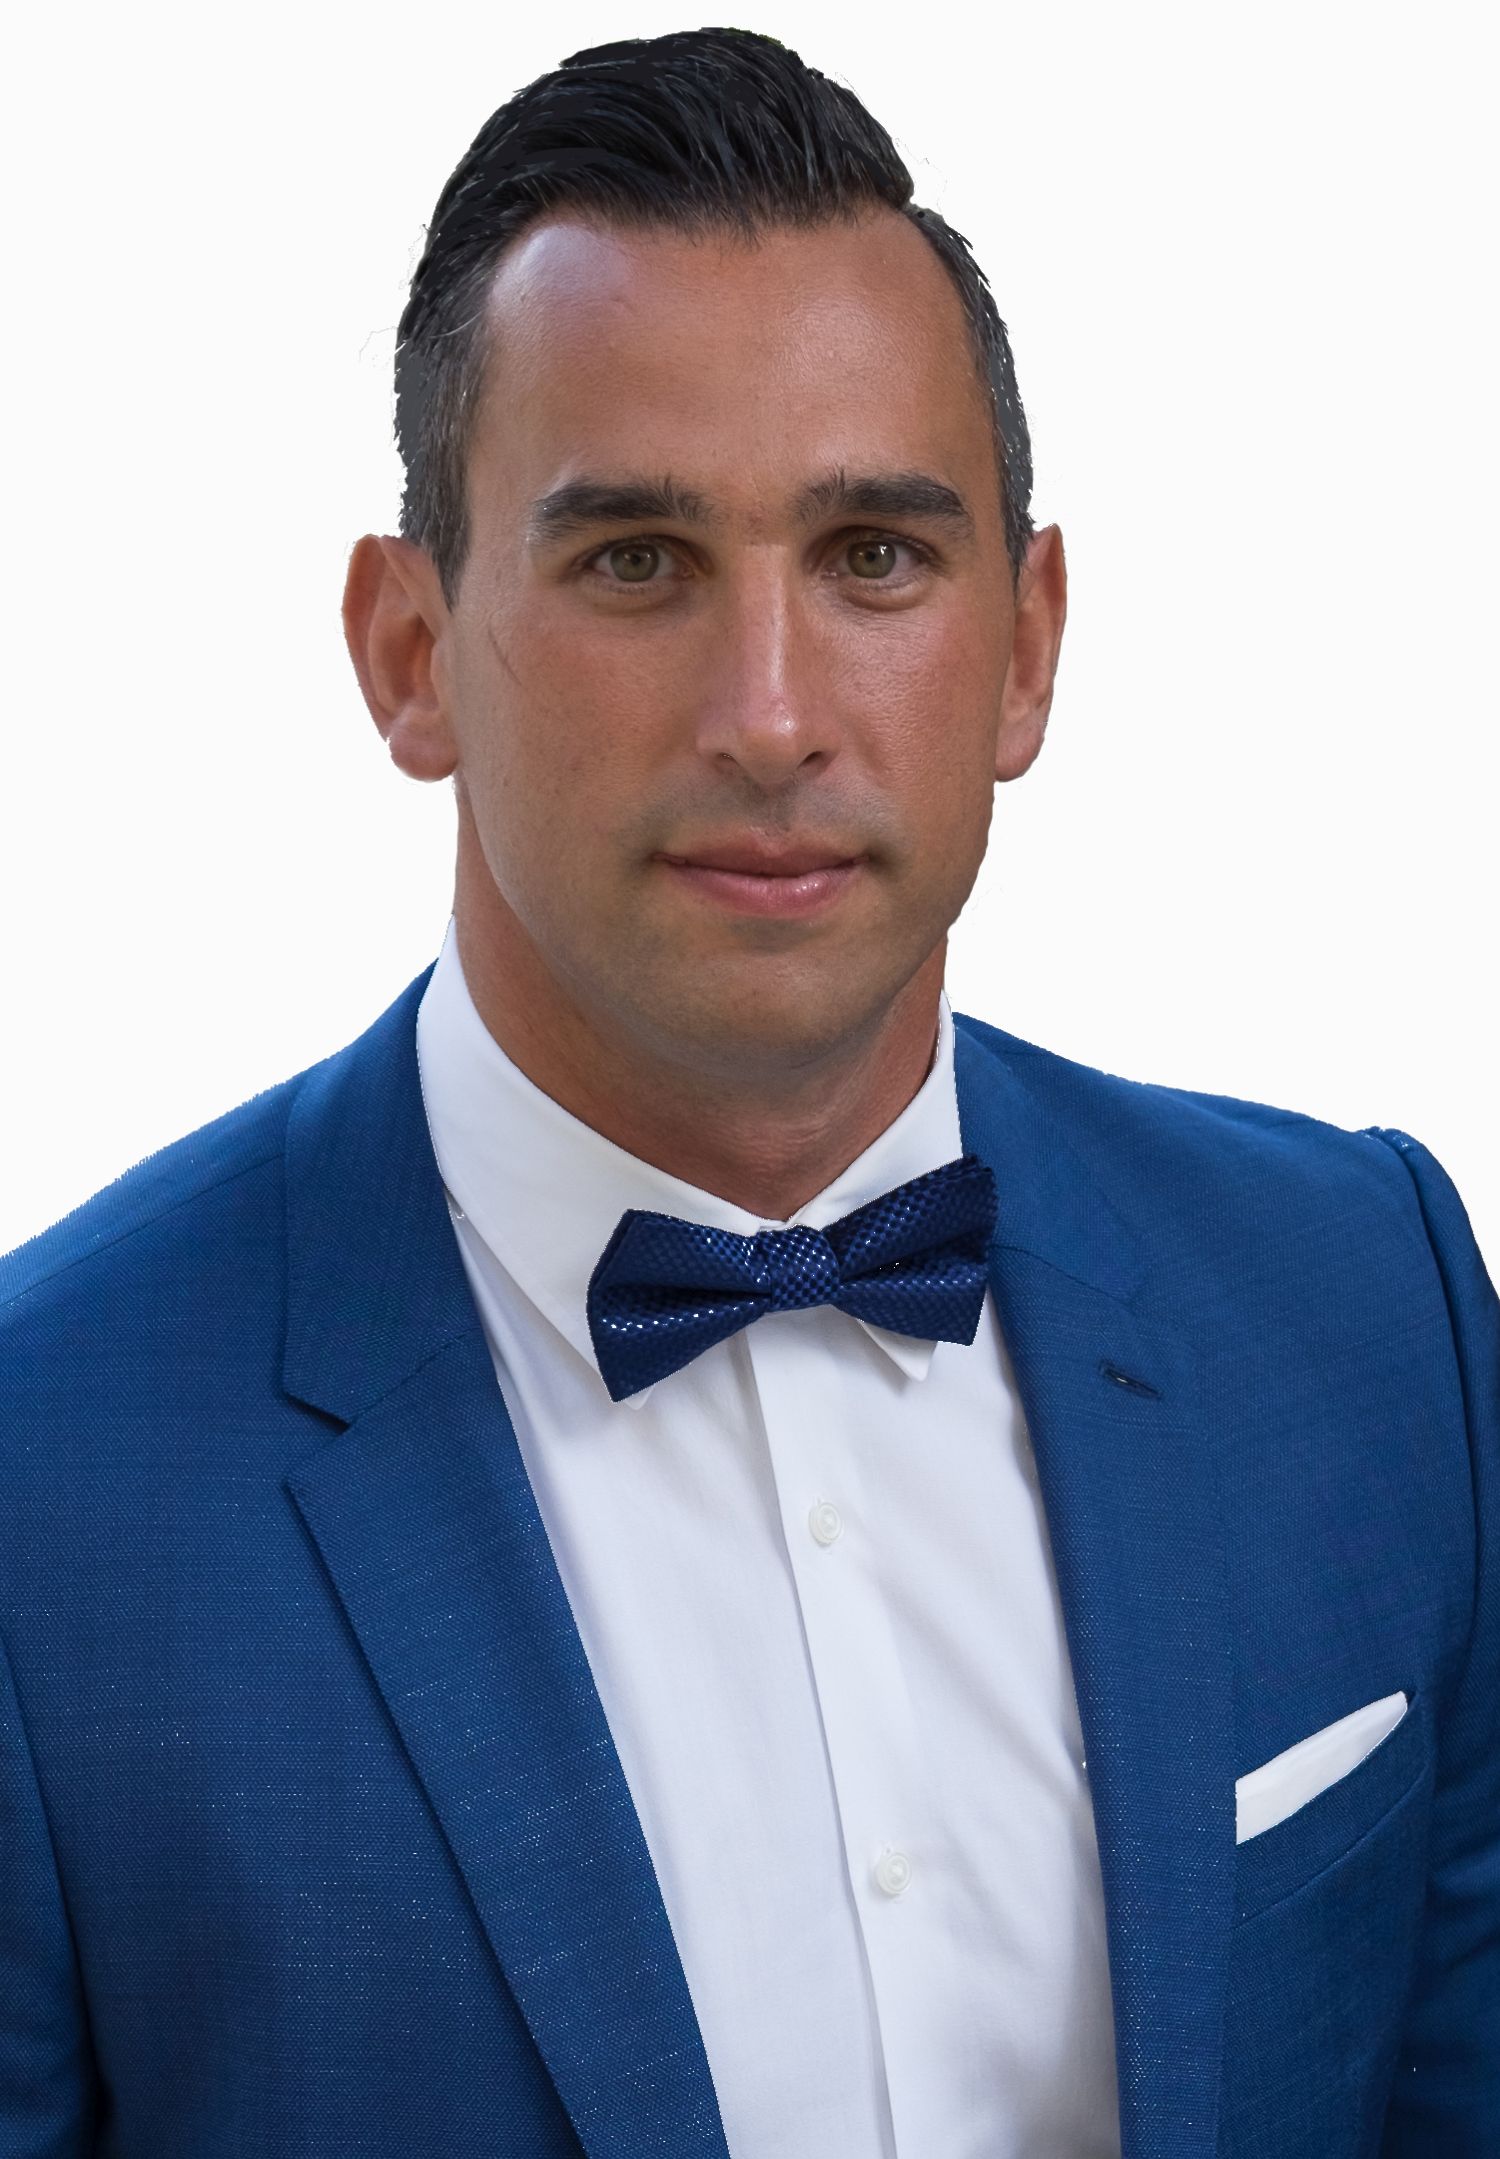 Jimmy Chiropoulos, Certified Real Estate Broker - Laval, QC